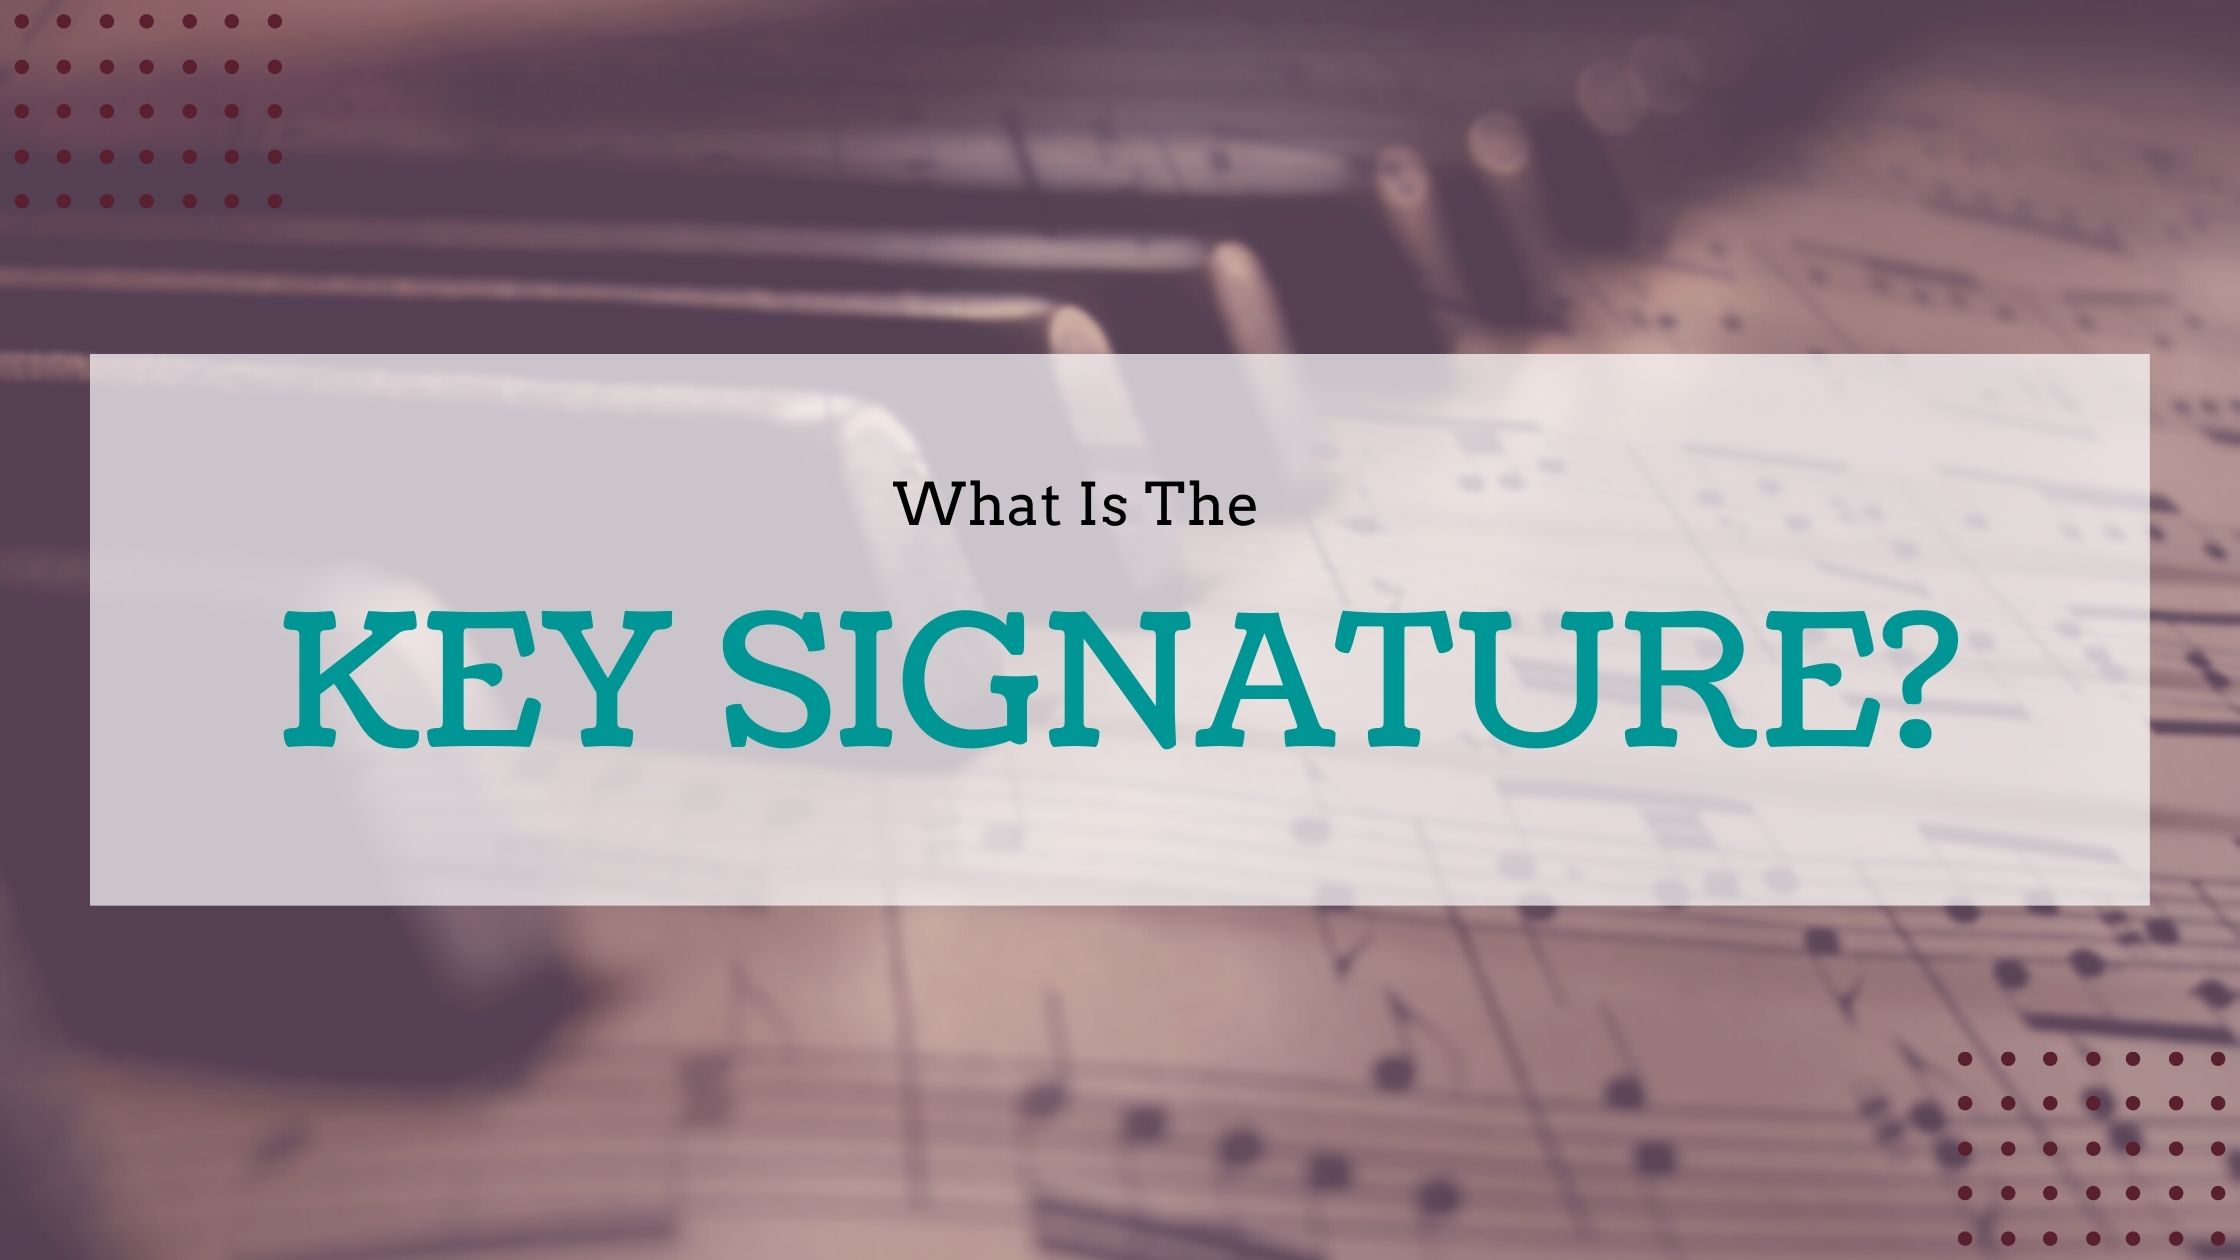 Do you know which sharps or flats belong to a key? Test yourself with this key signatures quiz and find out!